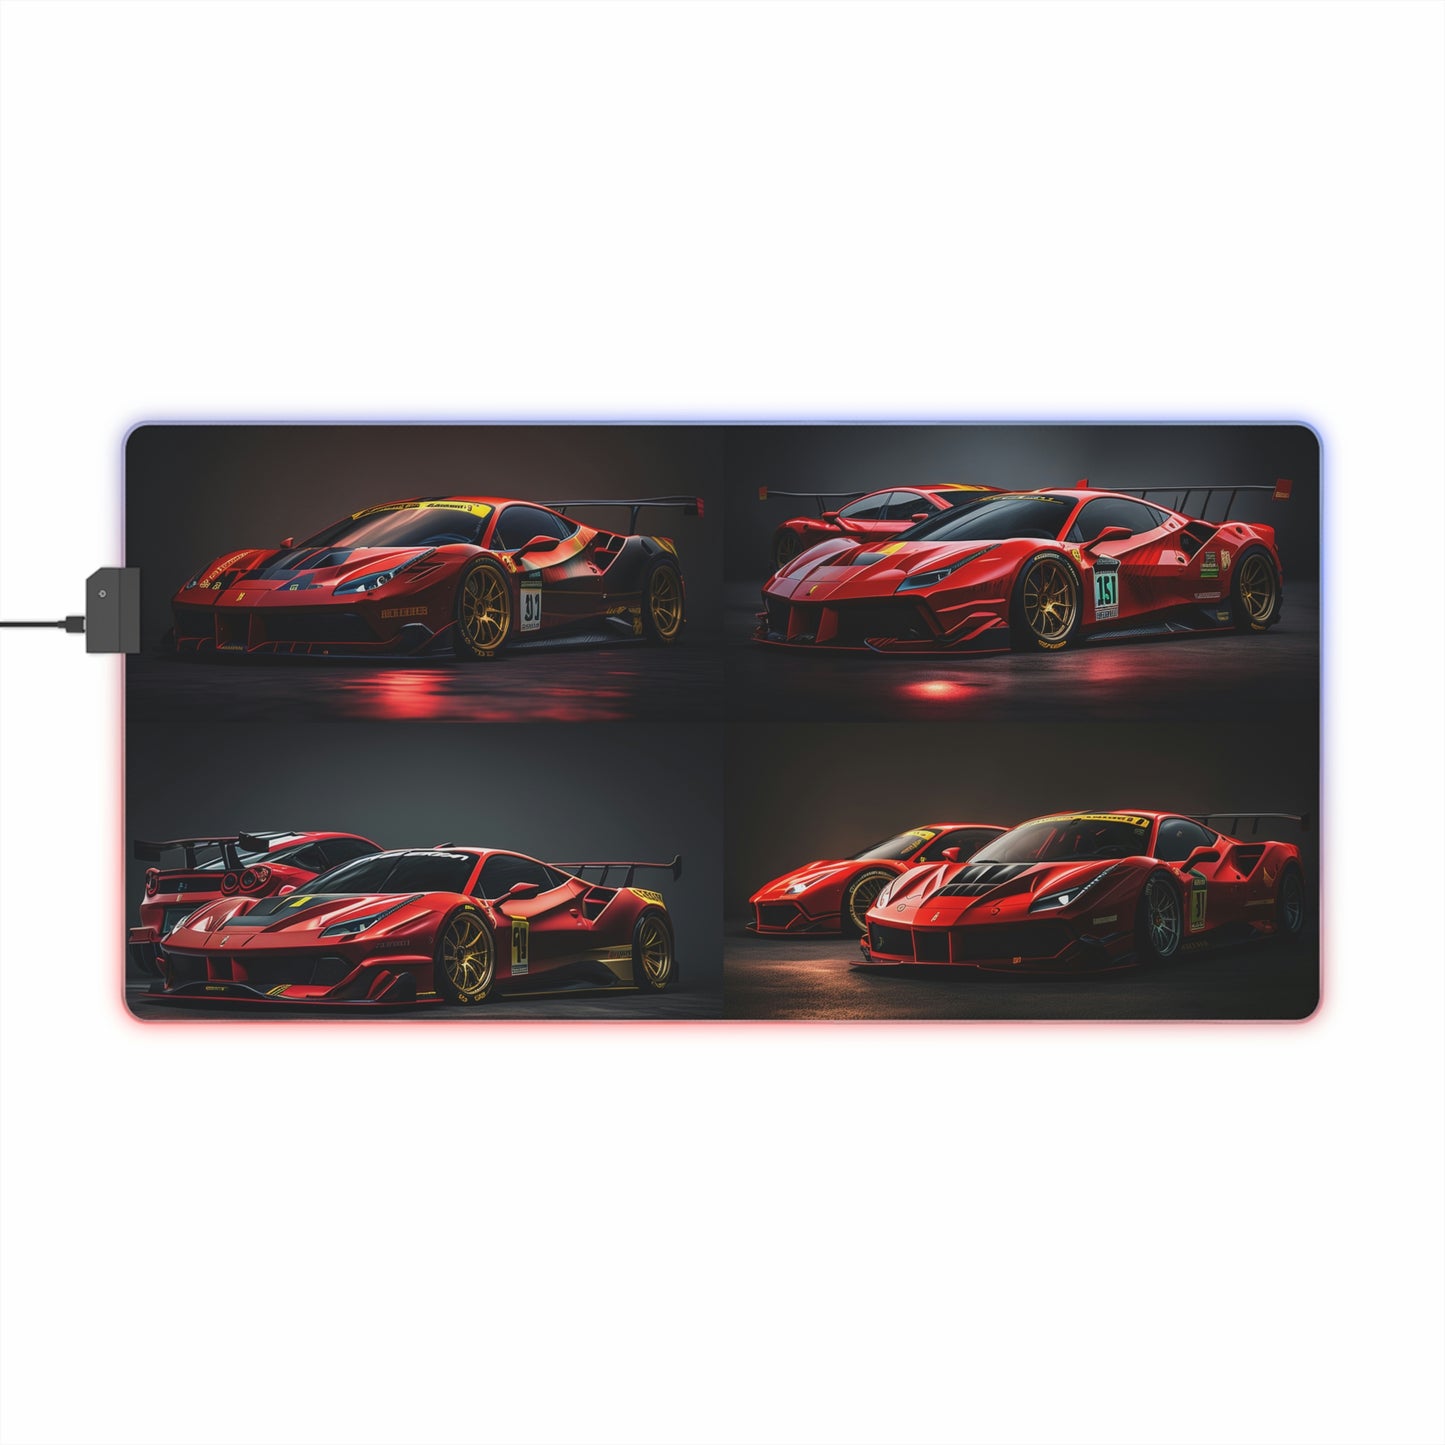 LED Gaming Mouse Pad Ferrari Red 4 pack